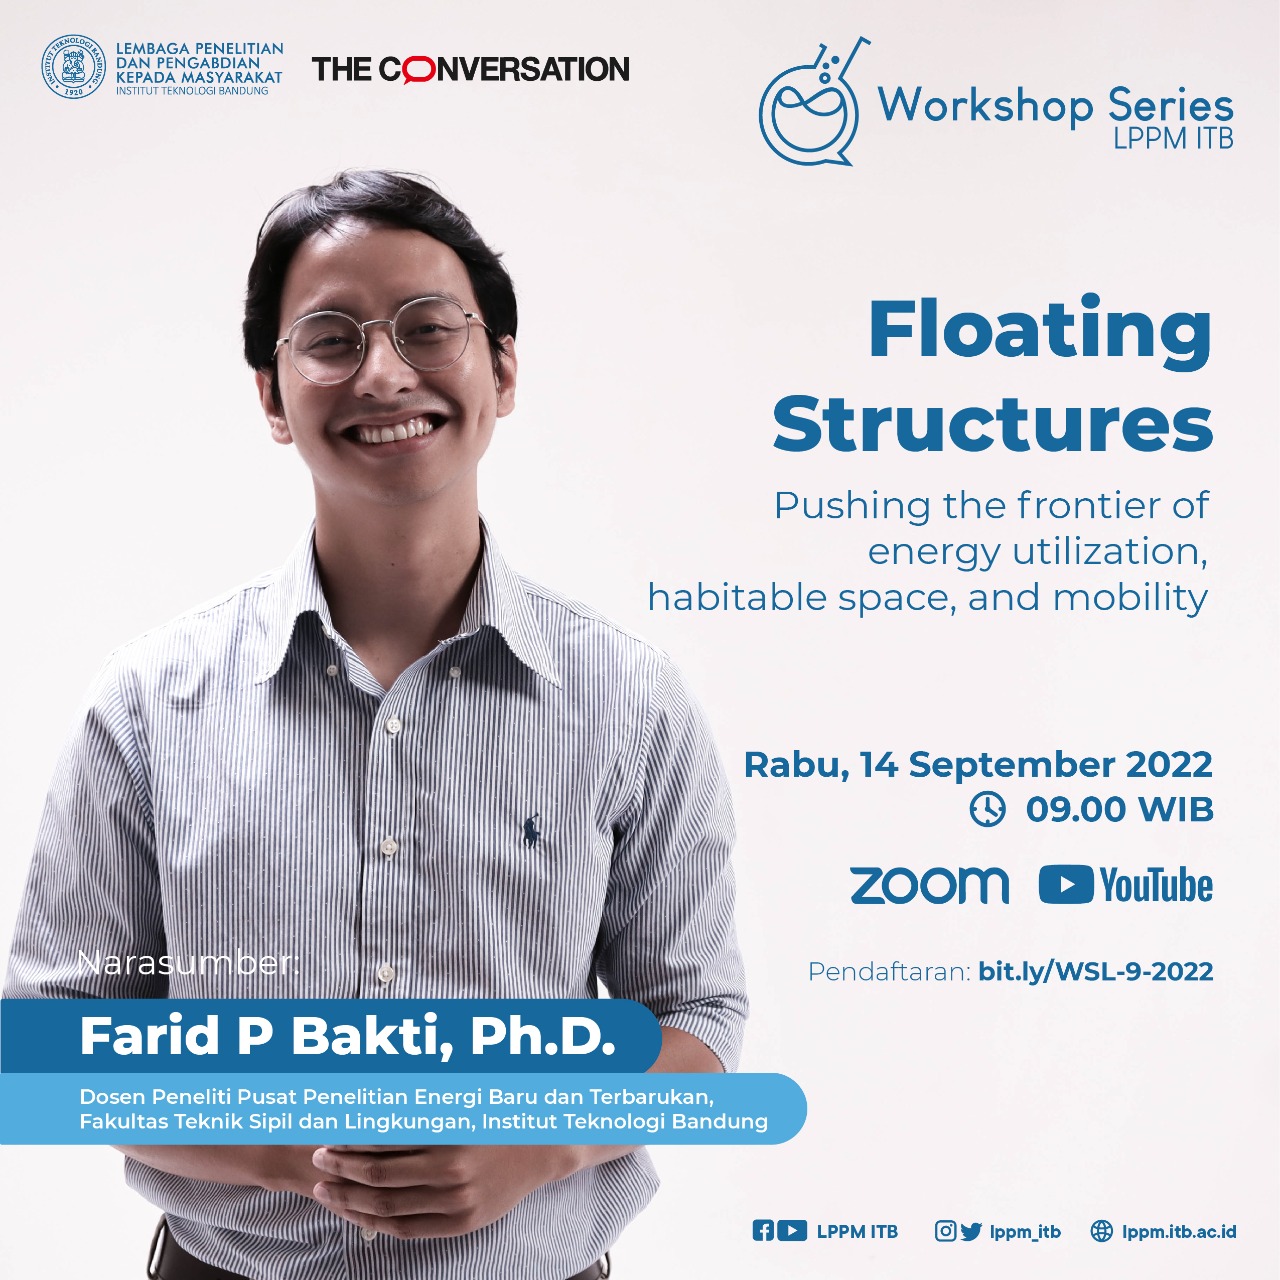 Floating Structures: Pushing the Frontier of Energy Utilization, Habitable Space, and Mobility